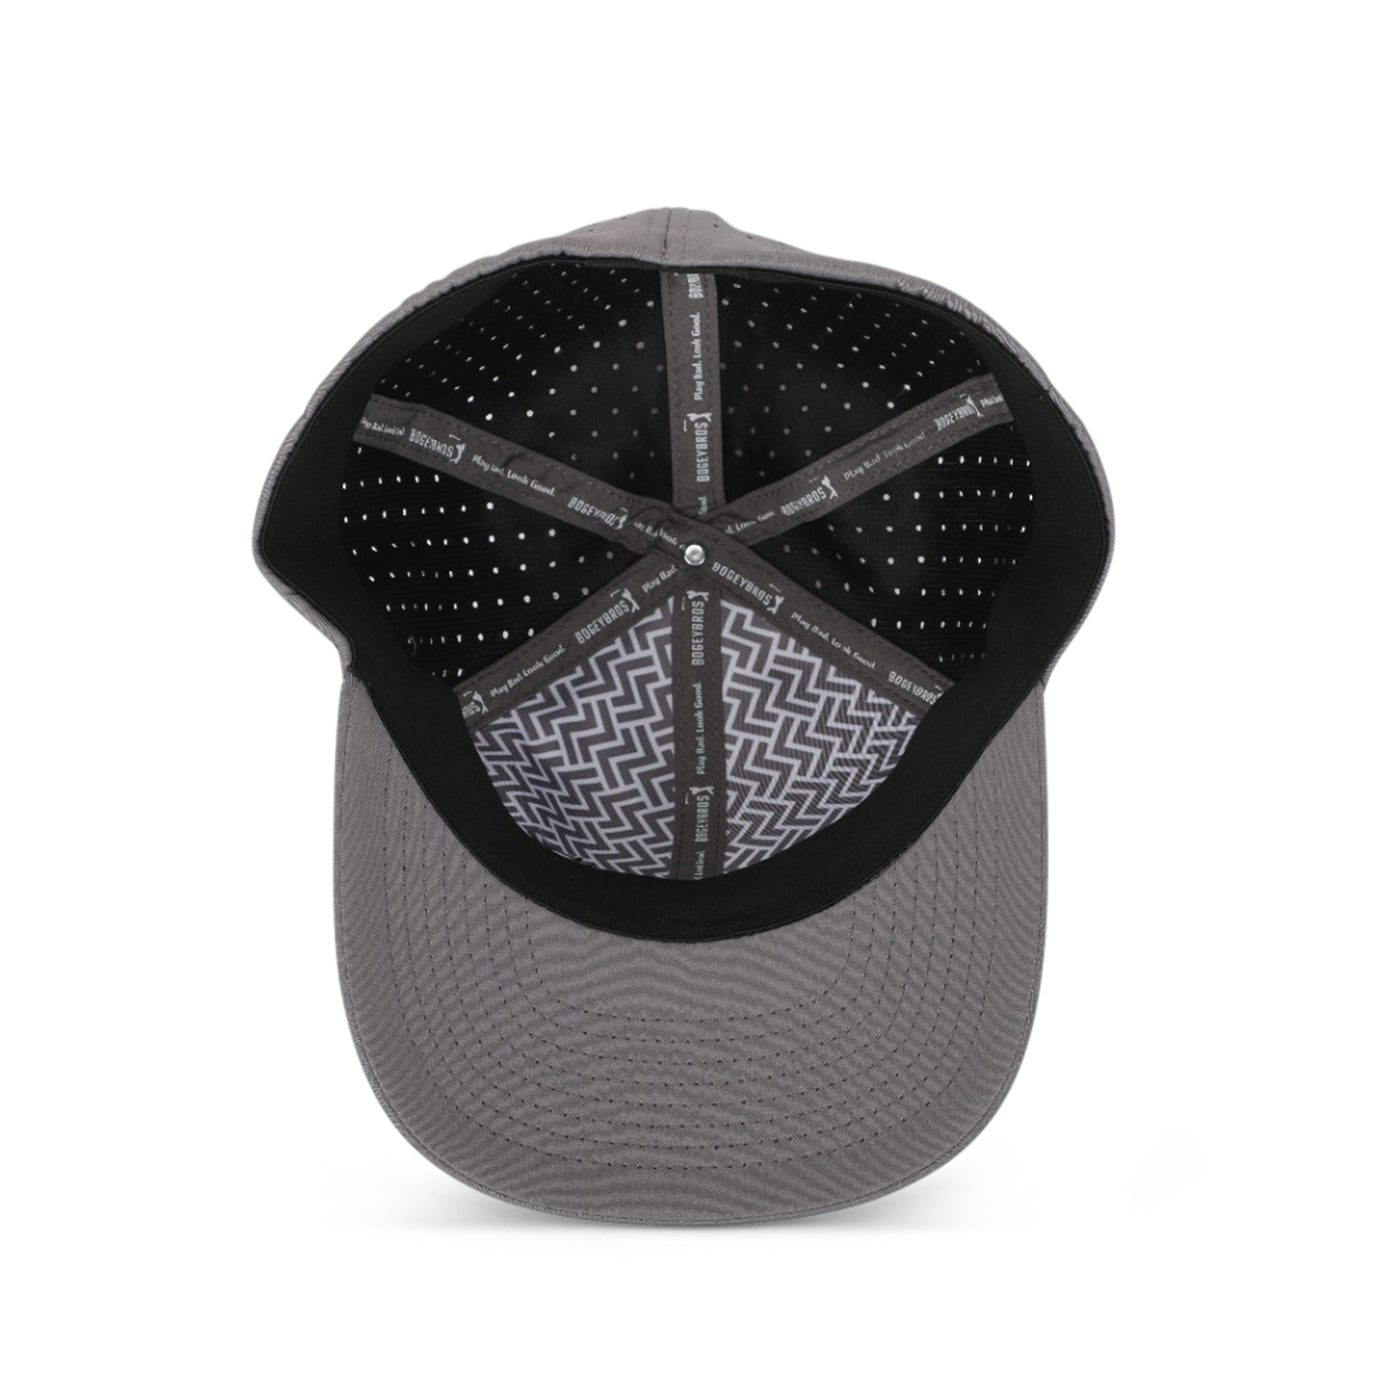 I'd Tap That - Performance Golf Hat - Stretch Fit